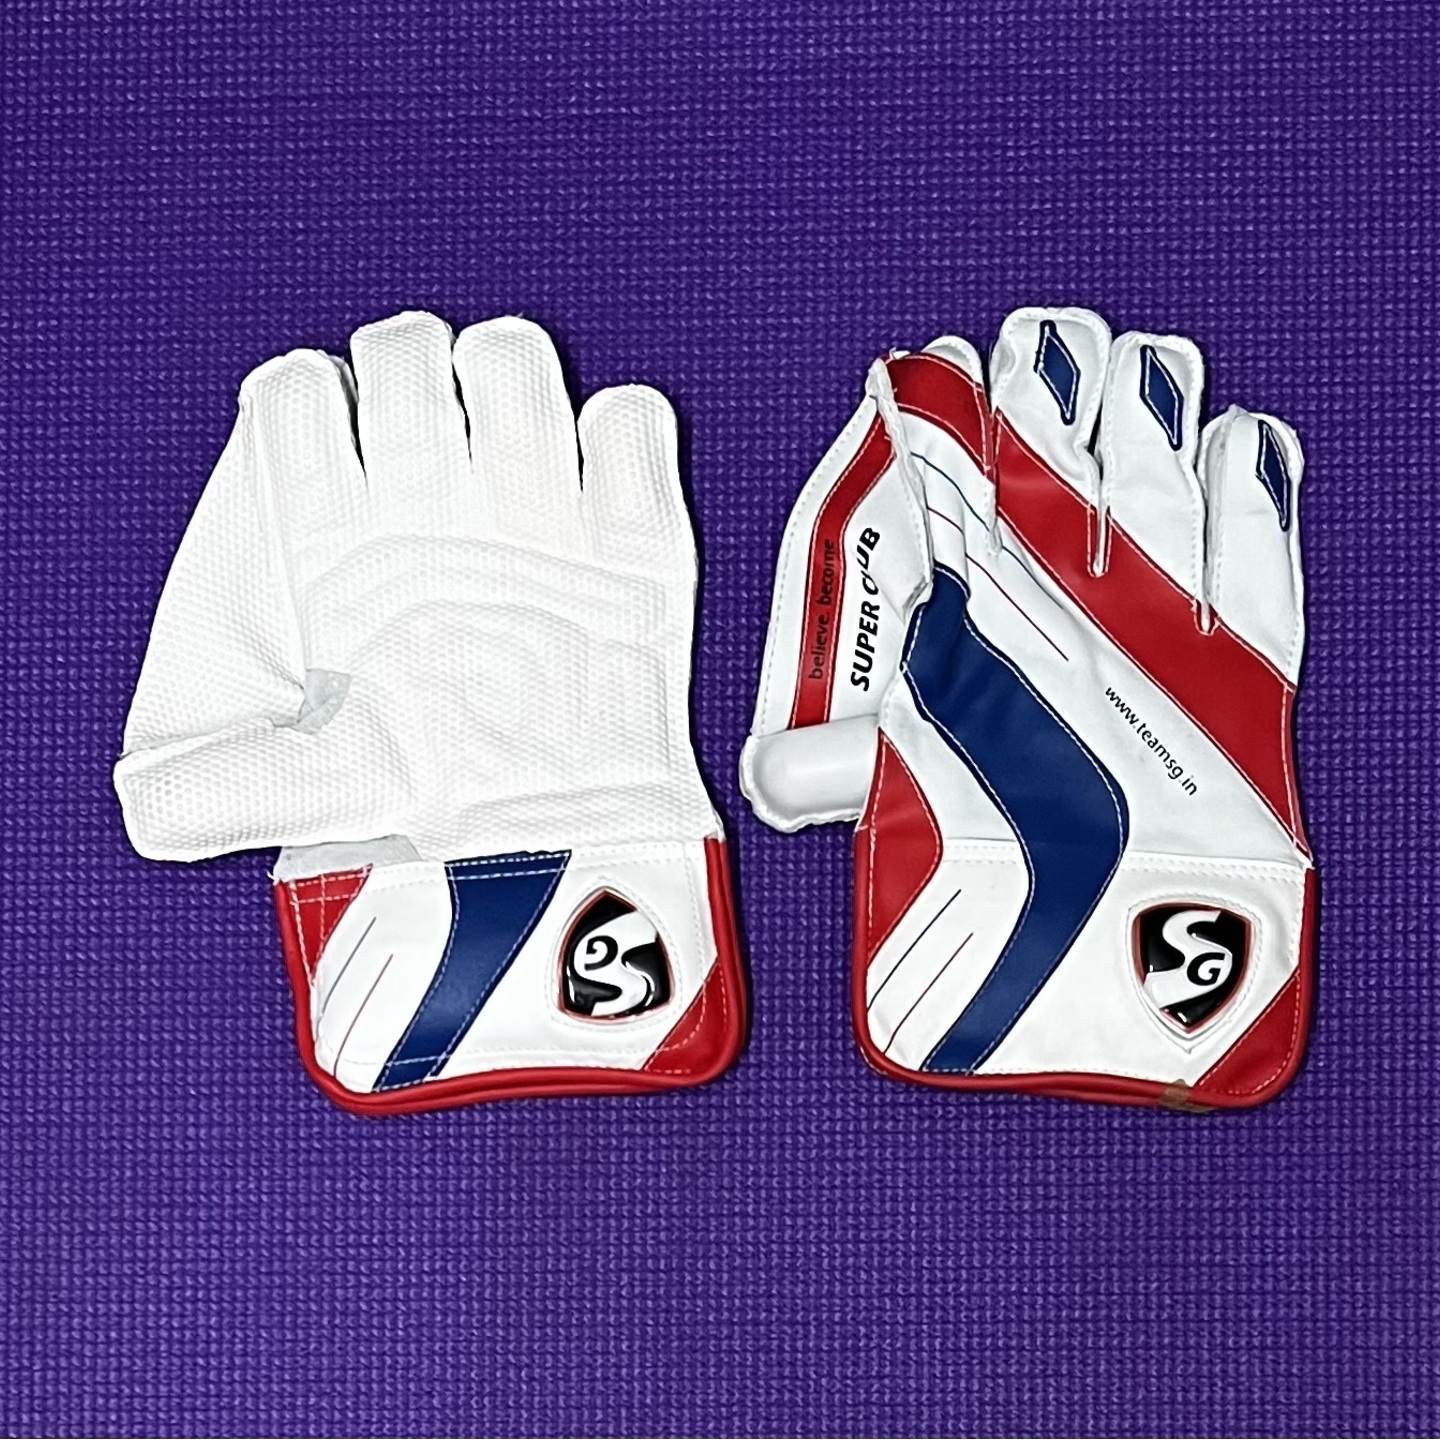 SG SUPER CLUB WICKET KEEPING GLOVES YOUTH